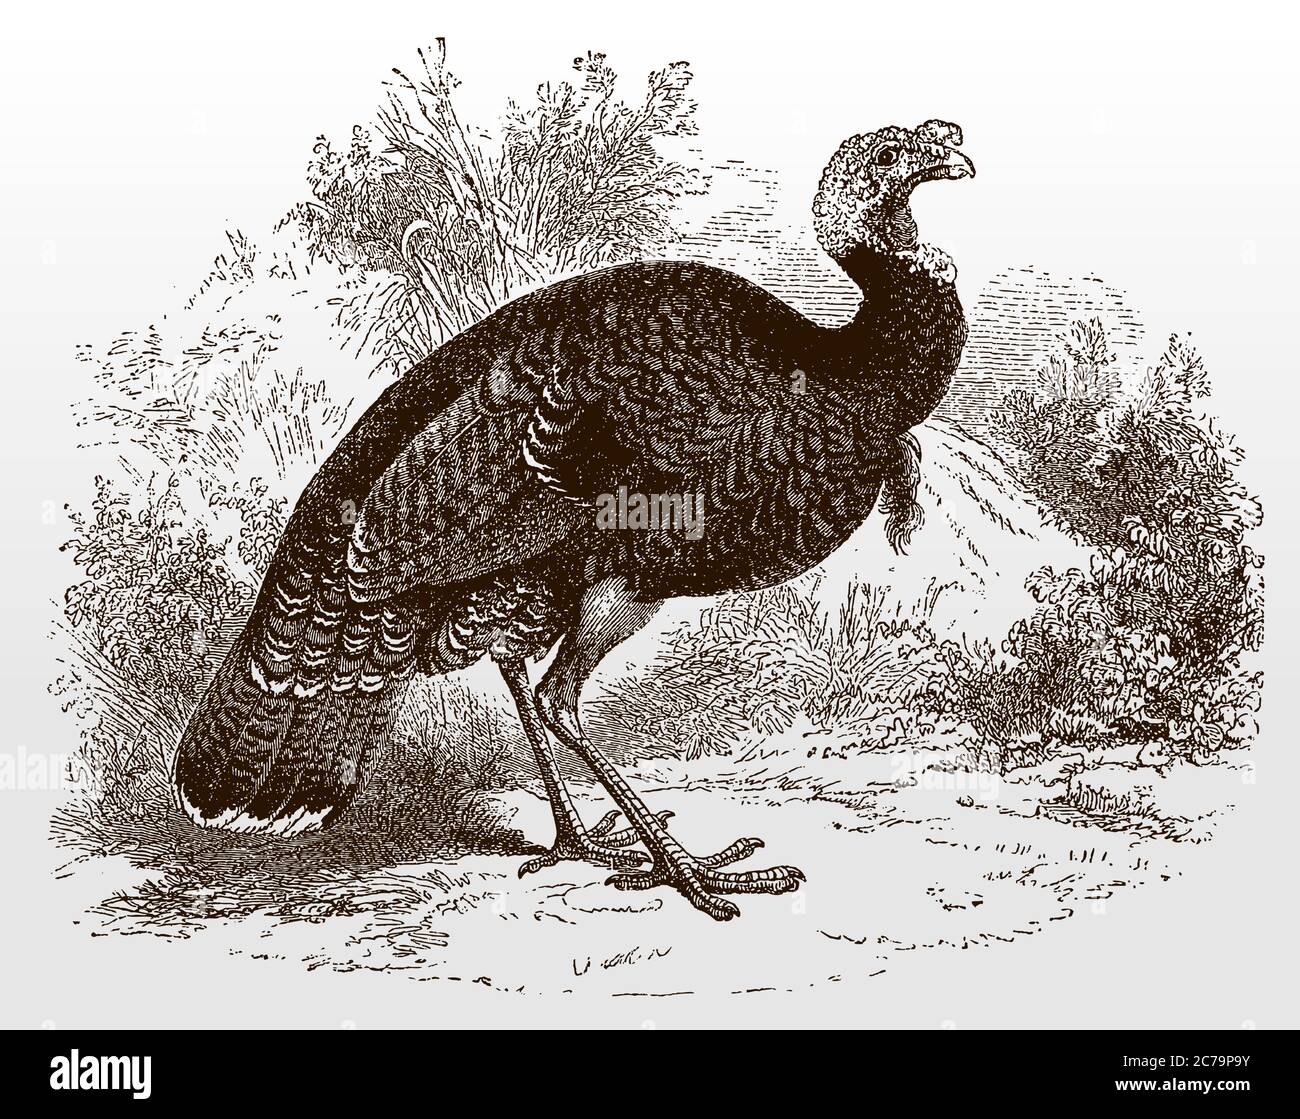 Wild turkey, meleagris gallopavo in side view standing in a bushy landscape, after an antique illustration from the 19th century Stock Vector